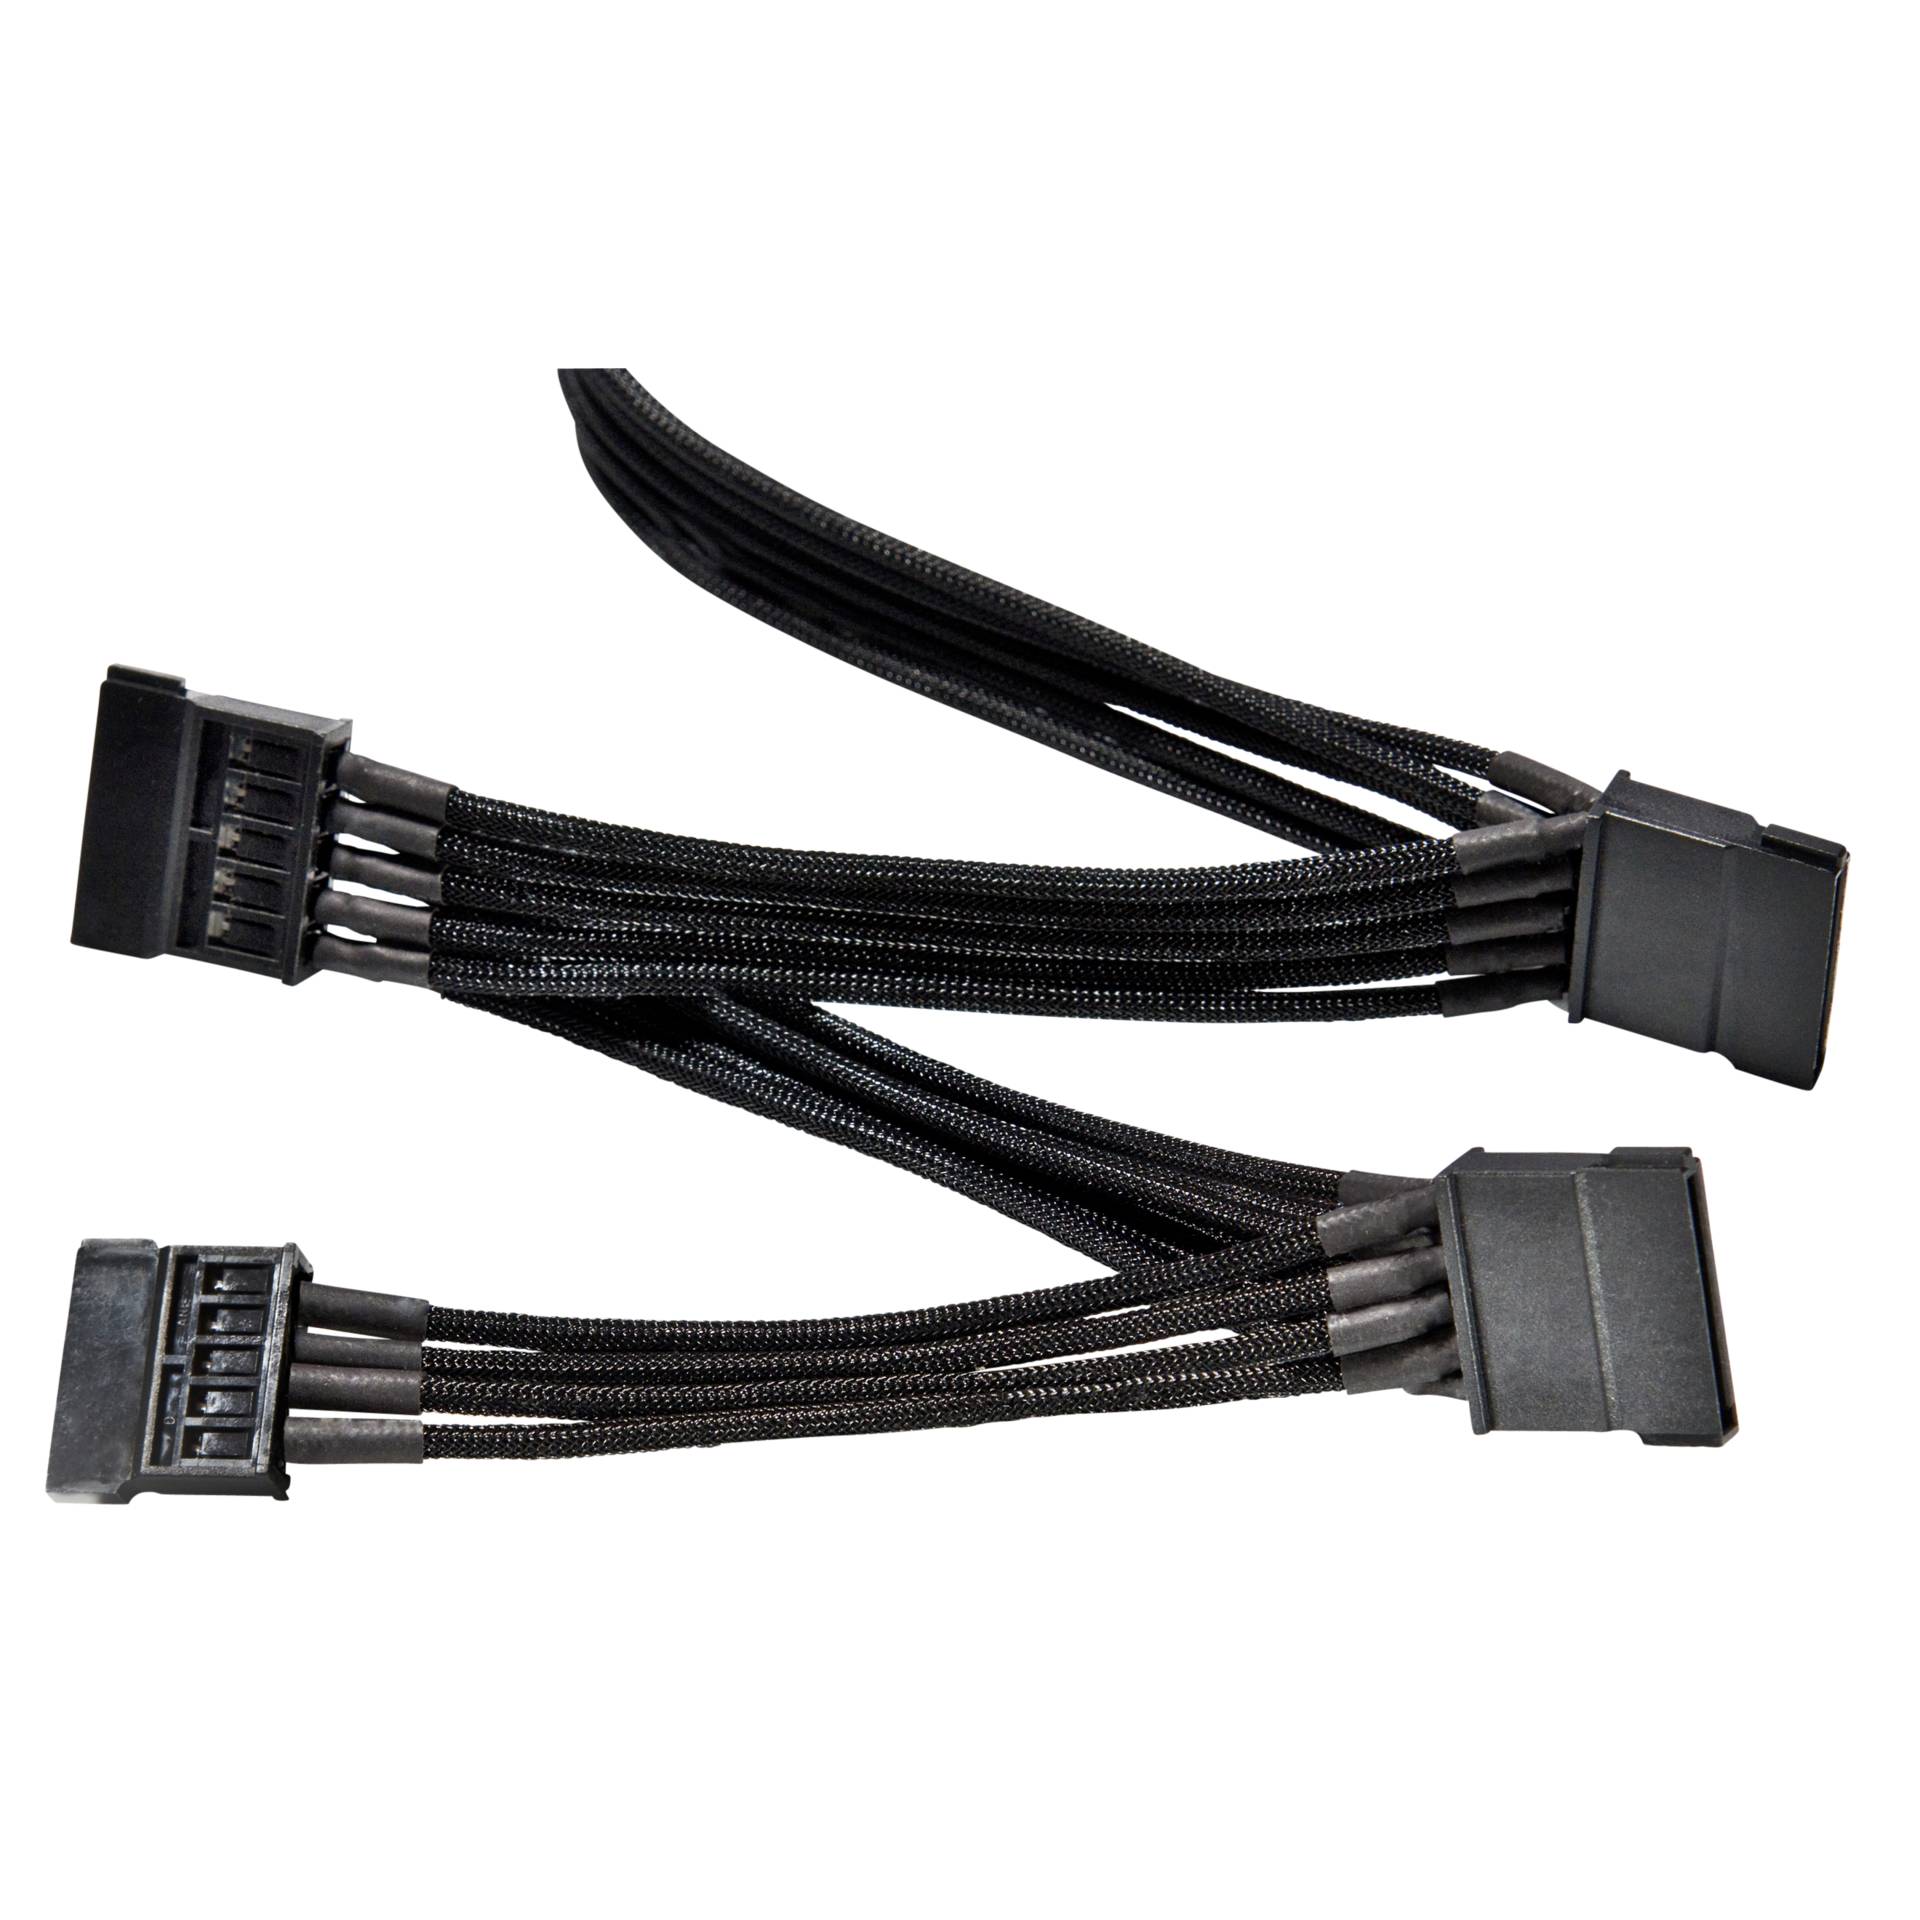 be quiet! Sleeved Power Cable CS-3640, 4x SATA, 600mm schwarz